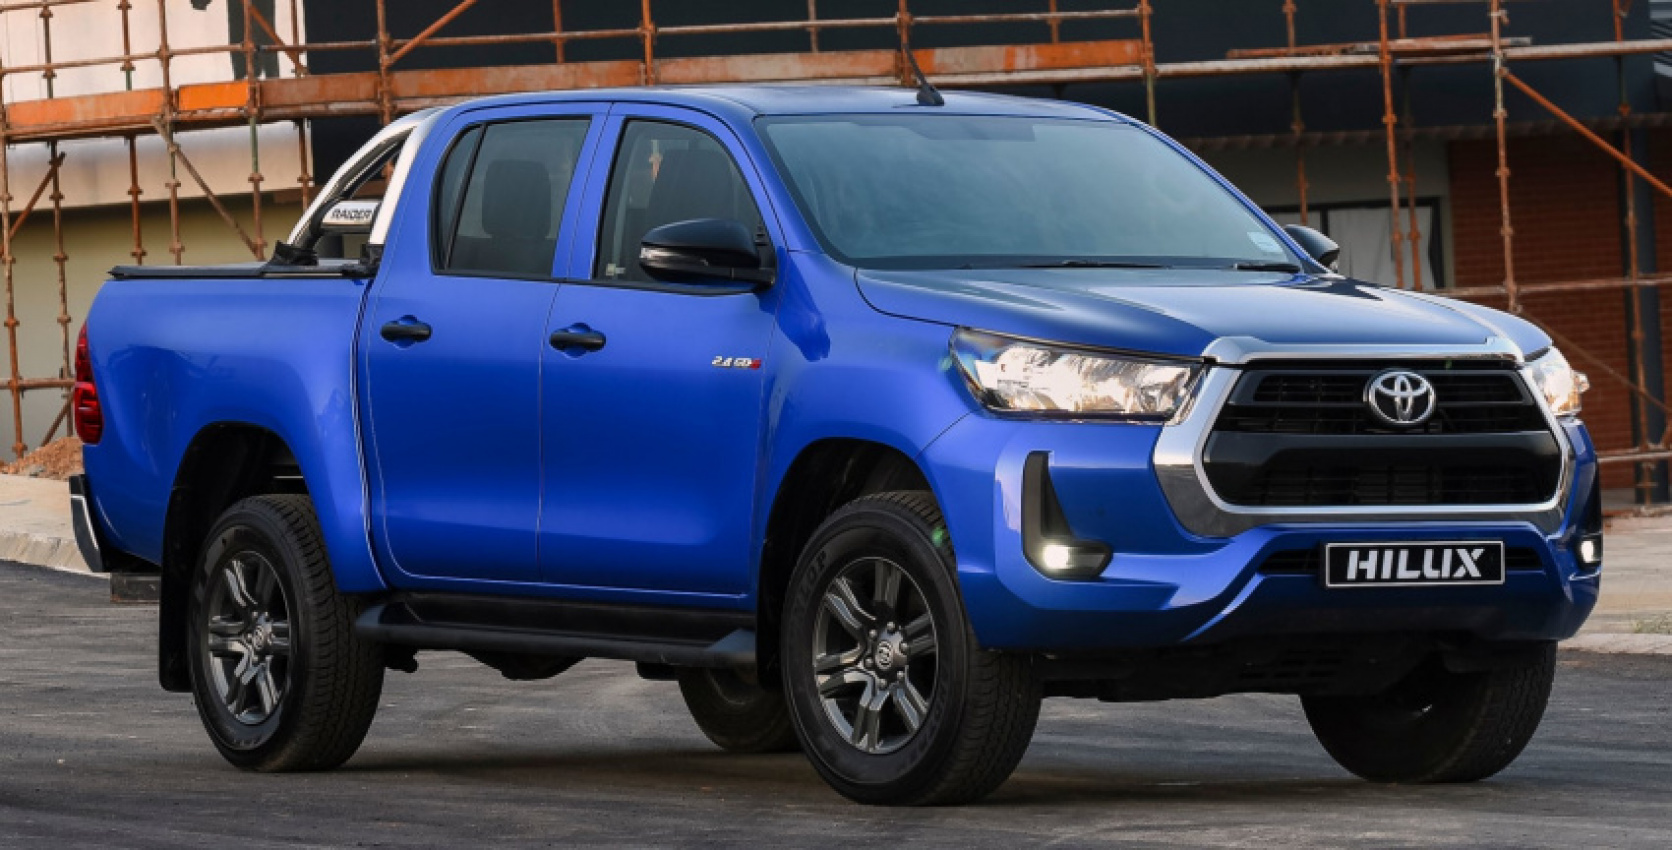 autos, cars, features, geo, peugeot, toyota, android, peugeot landtrek, toyota hilux, android, peugeot landtrek vs toyota hilux – what you get for the same price